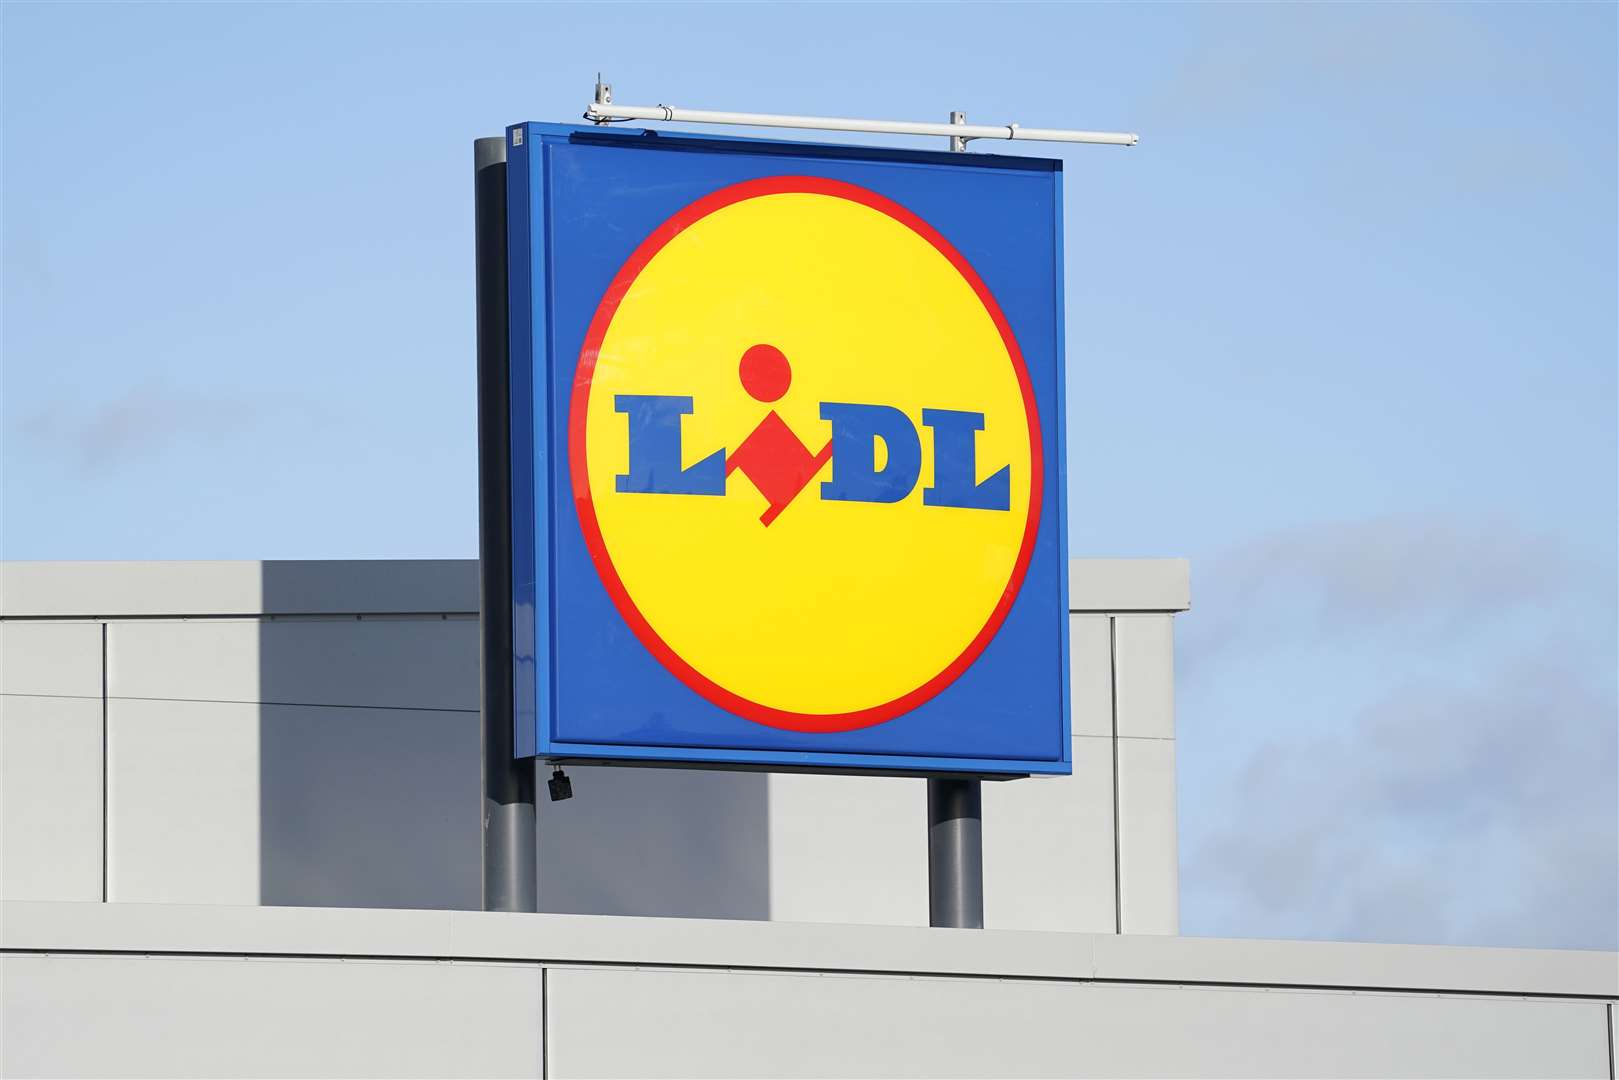 German discount supermarket Lidl uses a yellow circle in its main logo (Andrew Matthews/PA)